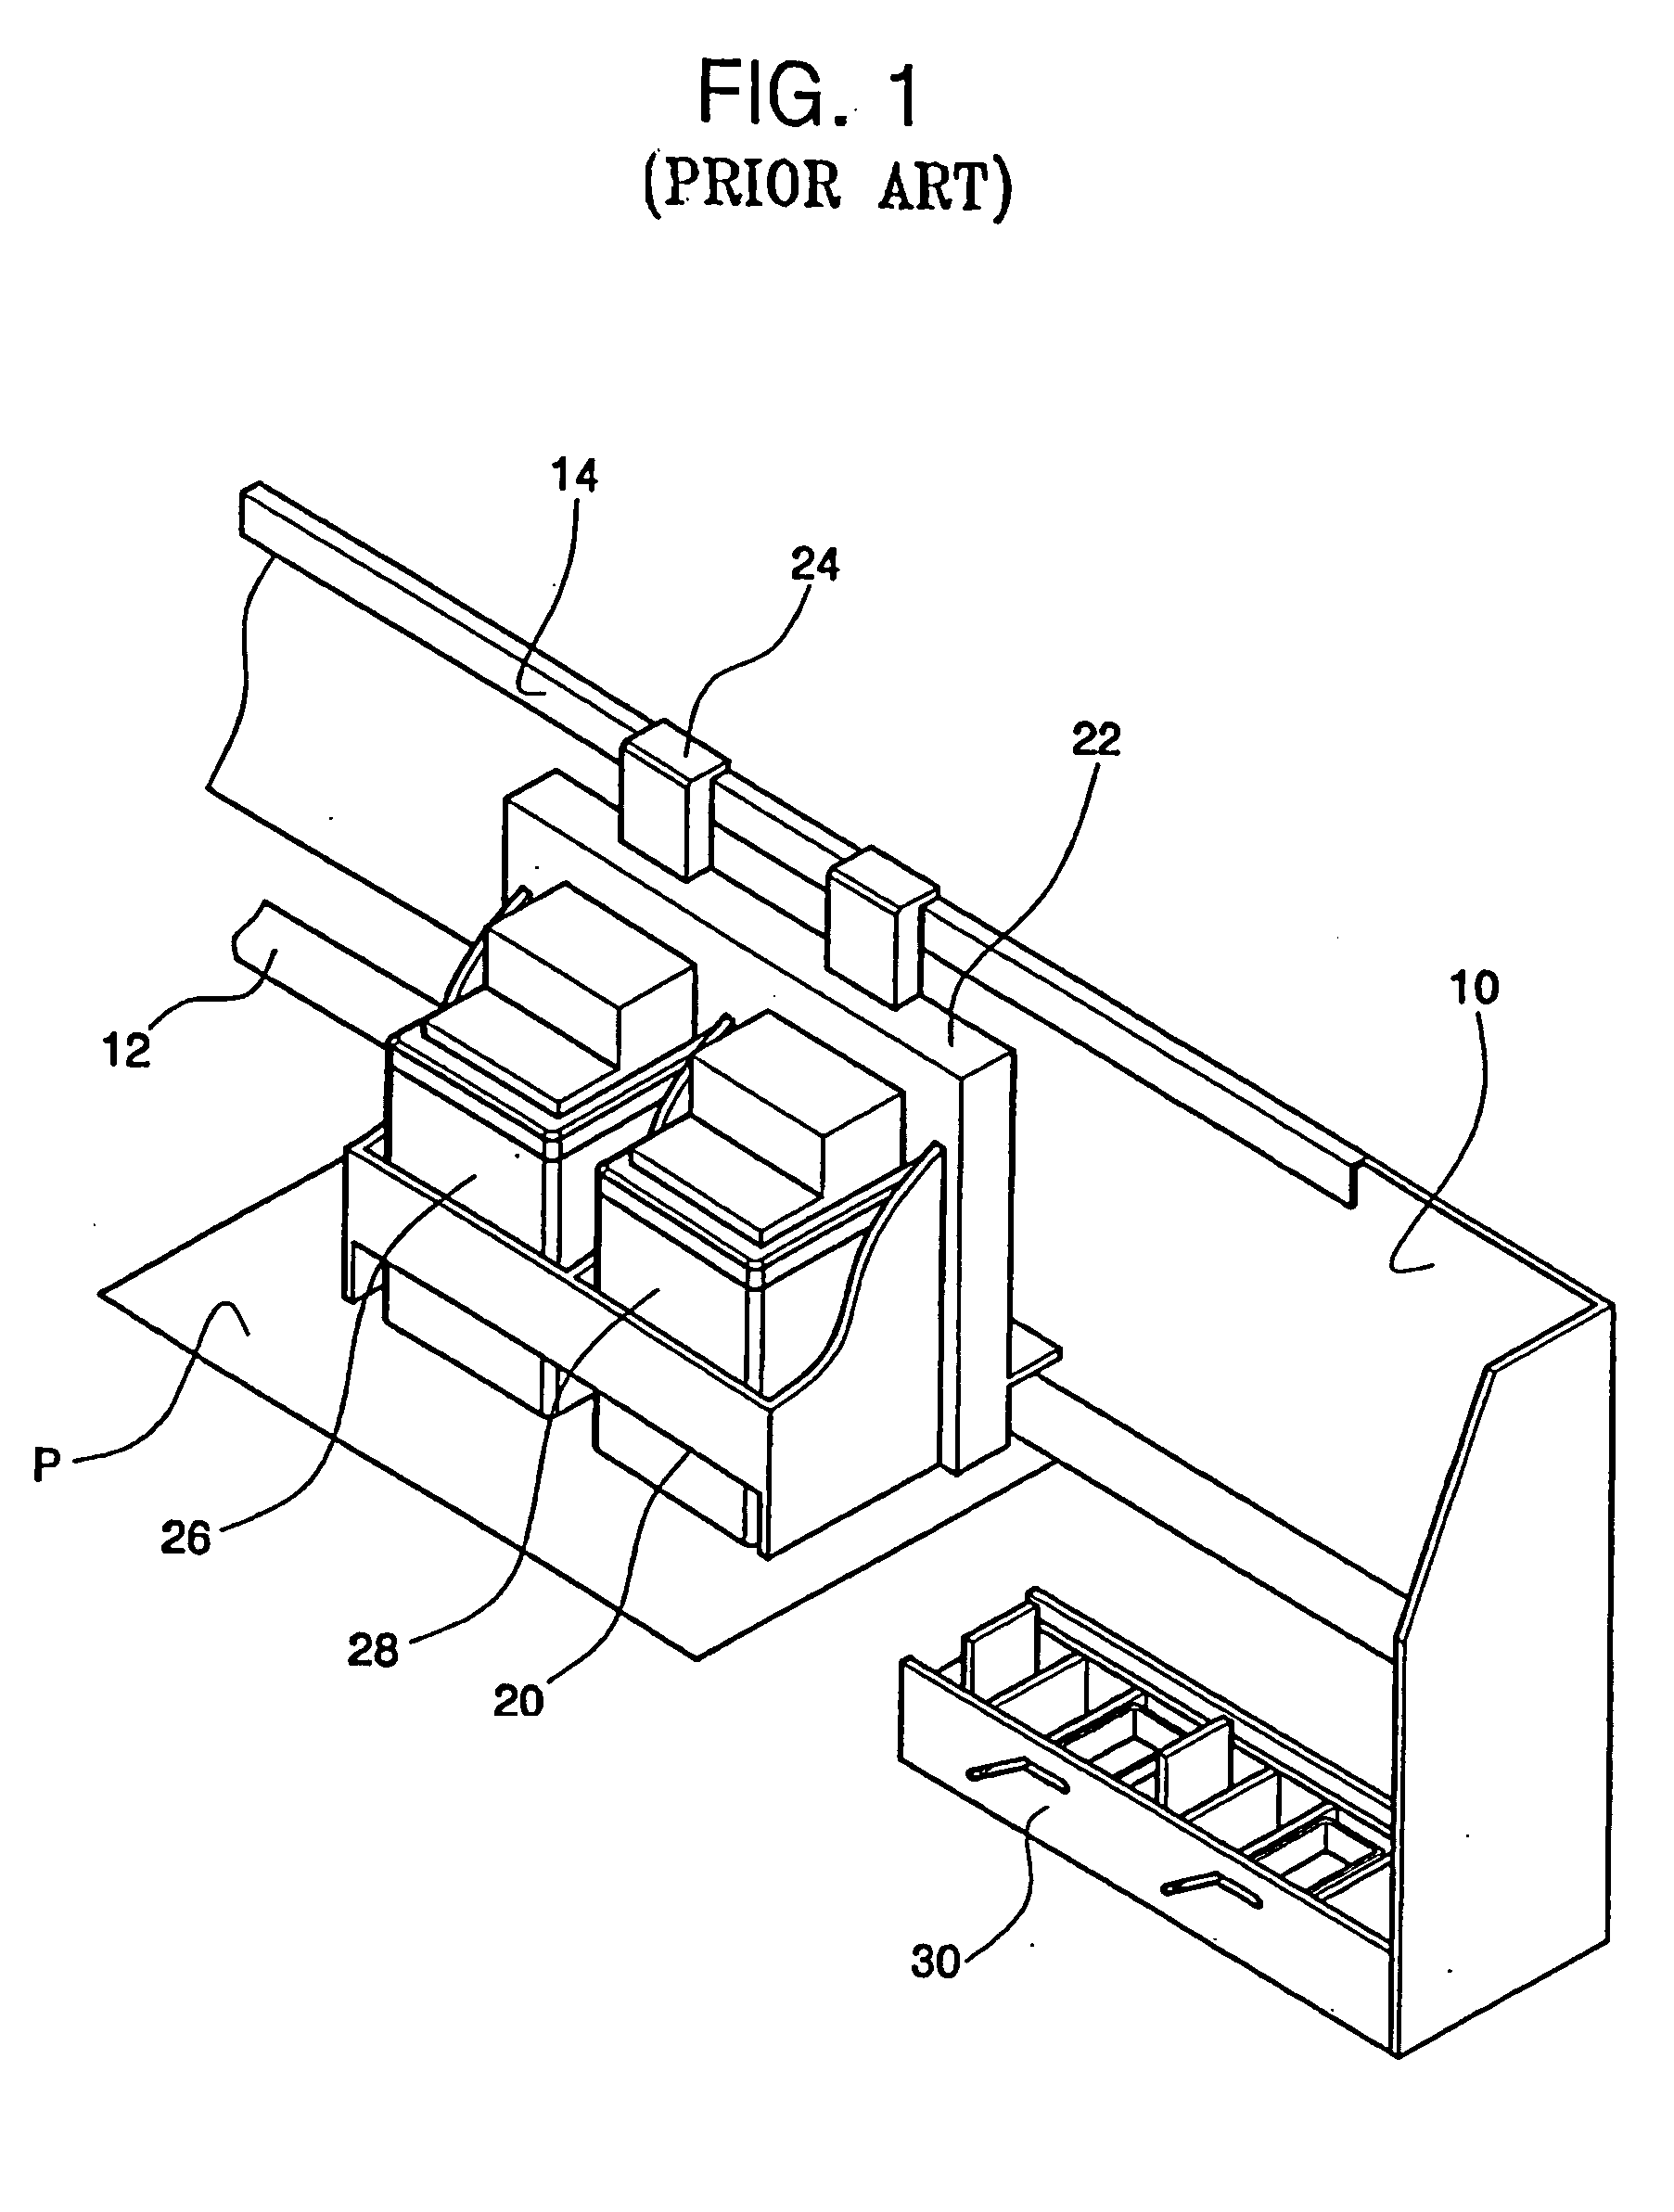 Image forming apparatus with dust collector